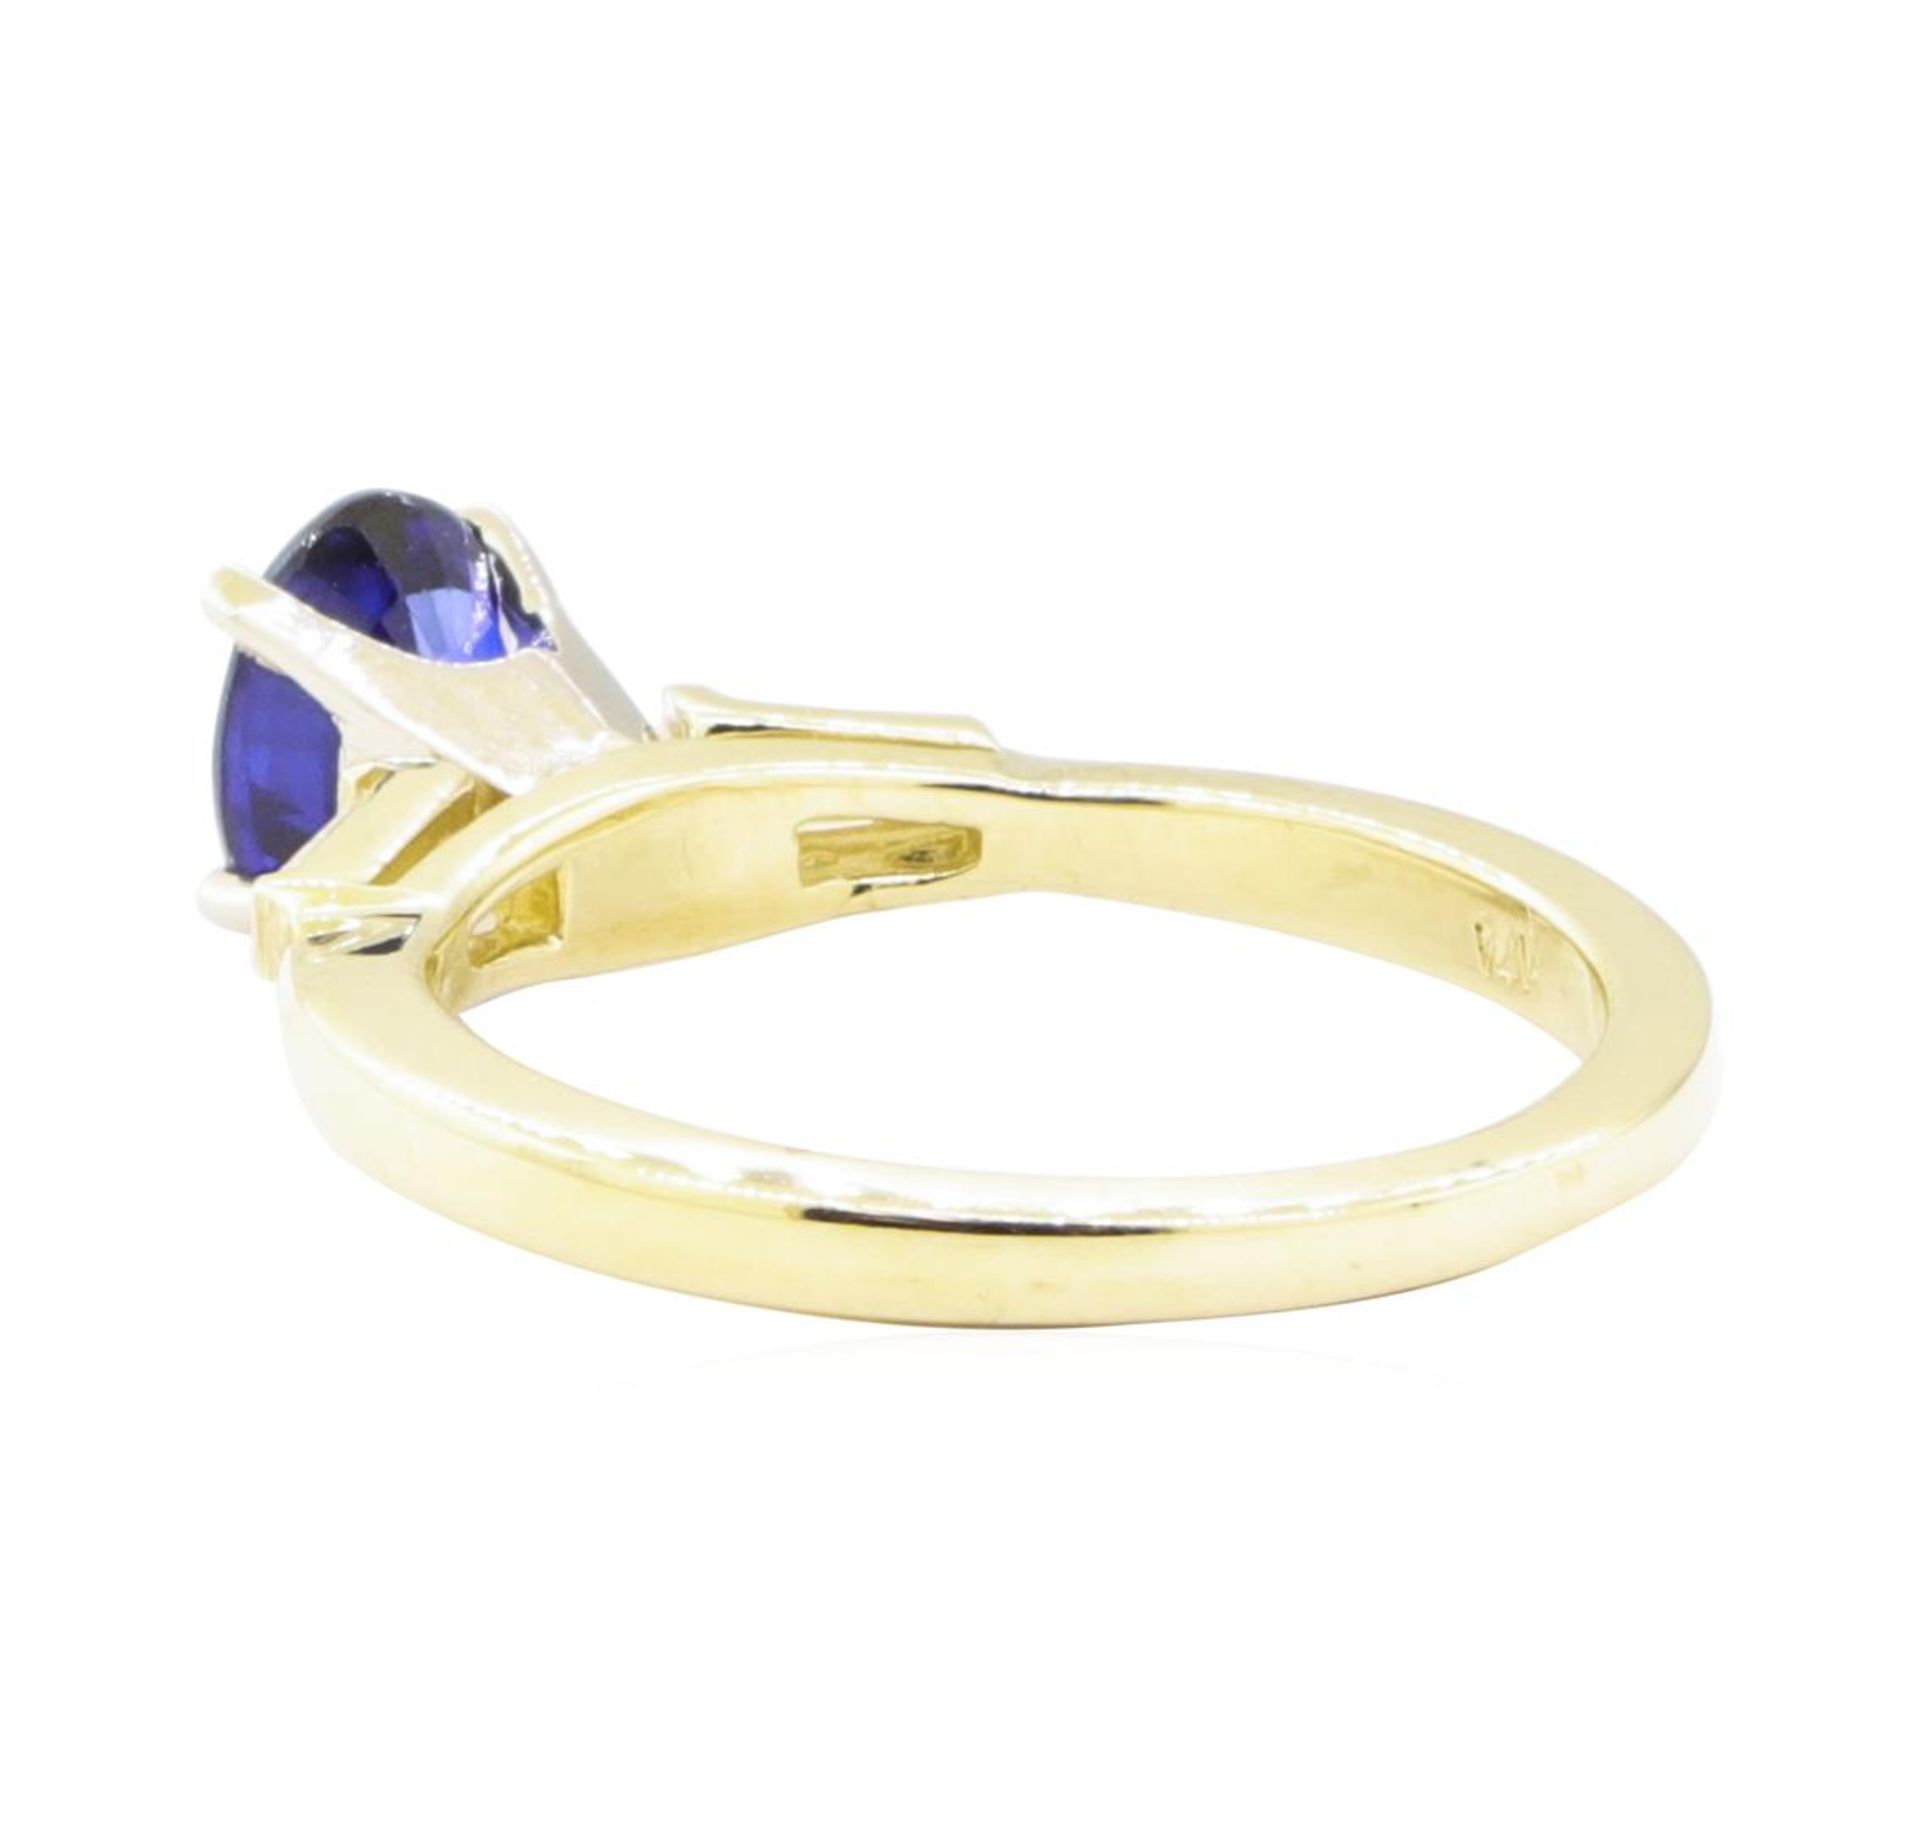 1.22 ctw Sapphire and Diamond Ring - 14KT Yellow Gold - Image 3 of 4